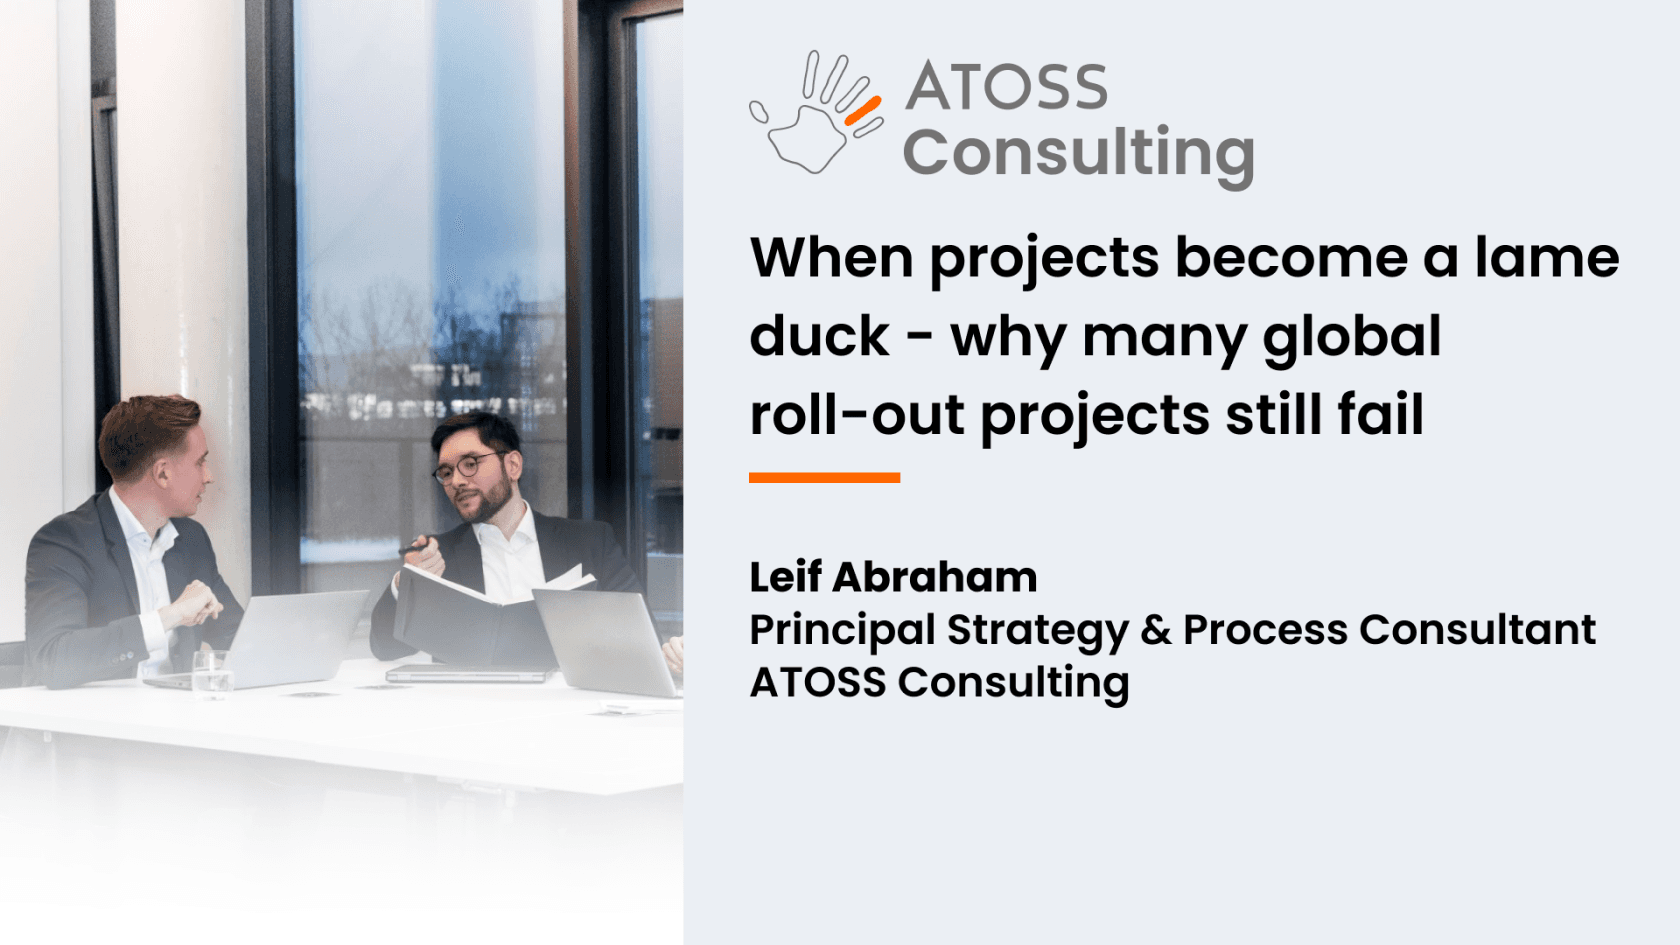 ATOSS Consulting - When projects become a lame duck - why many global roll-out projects still fail - Masterclass - 202404